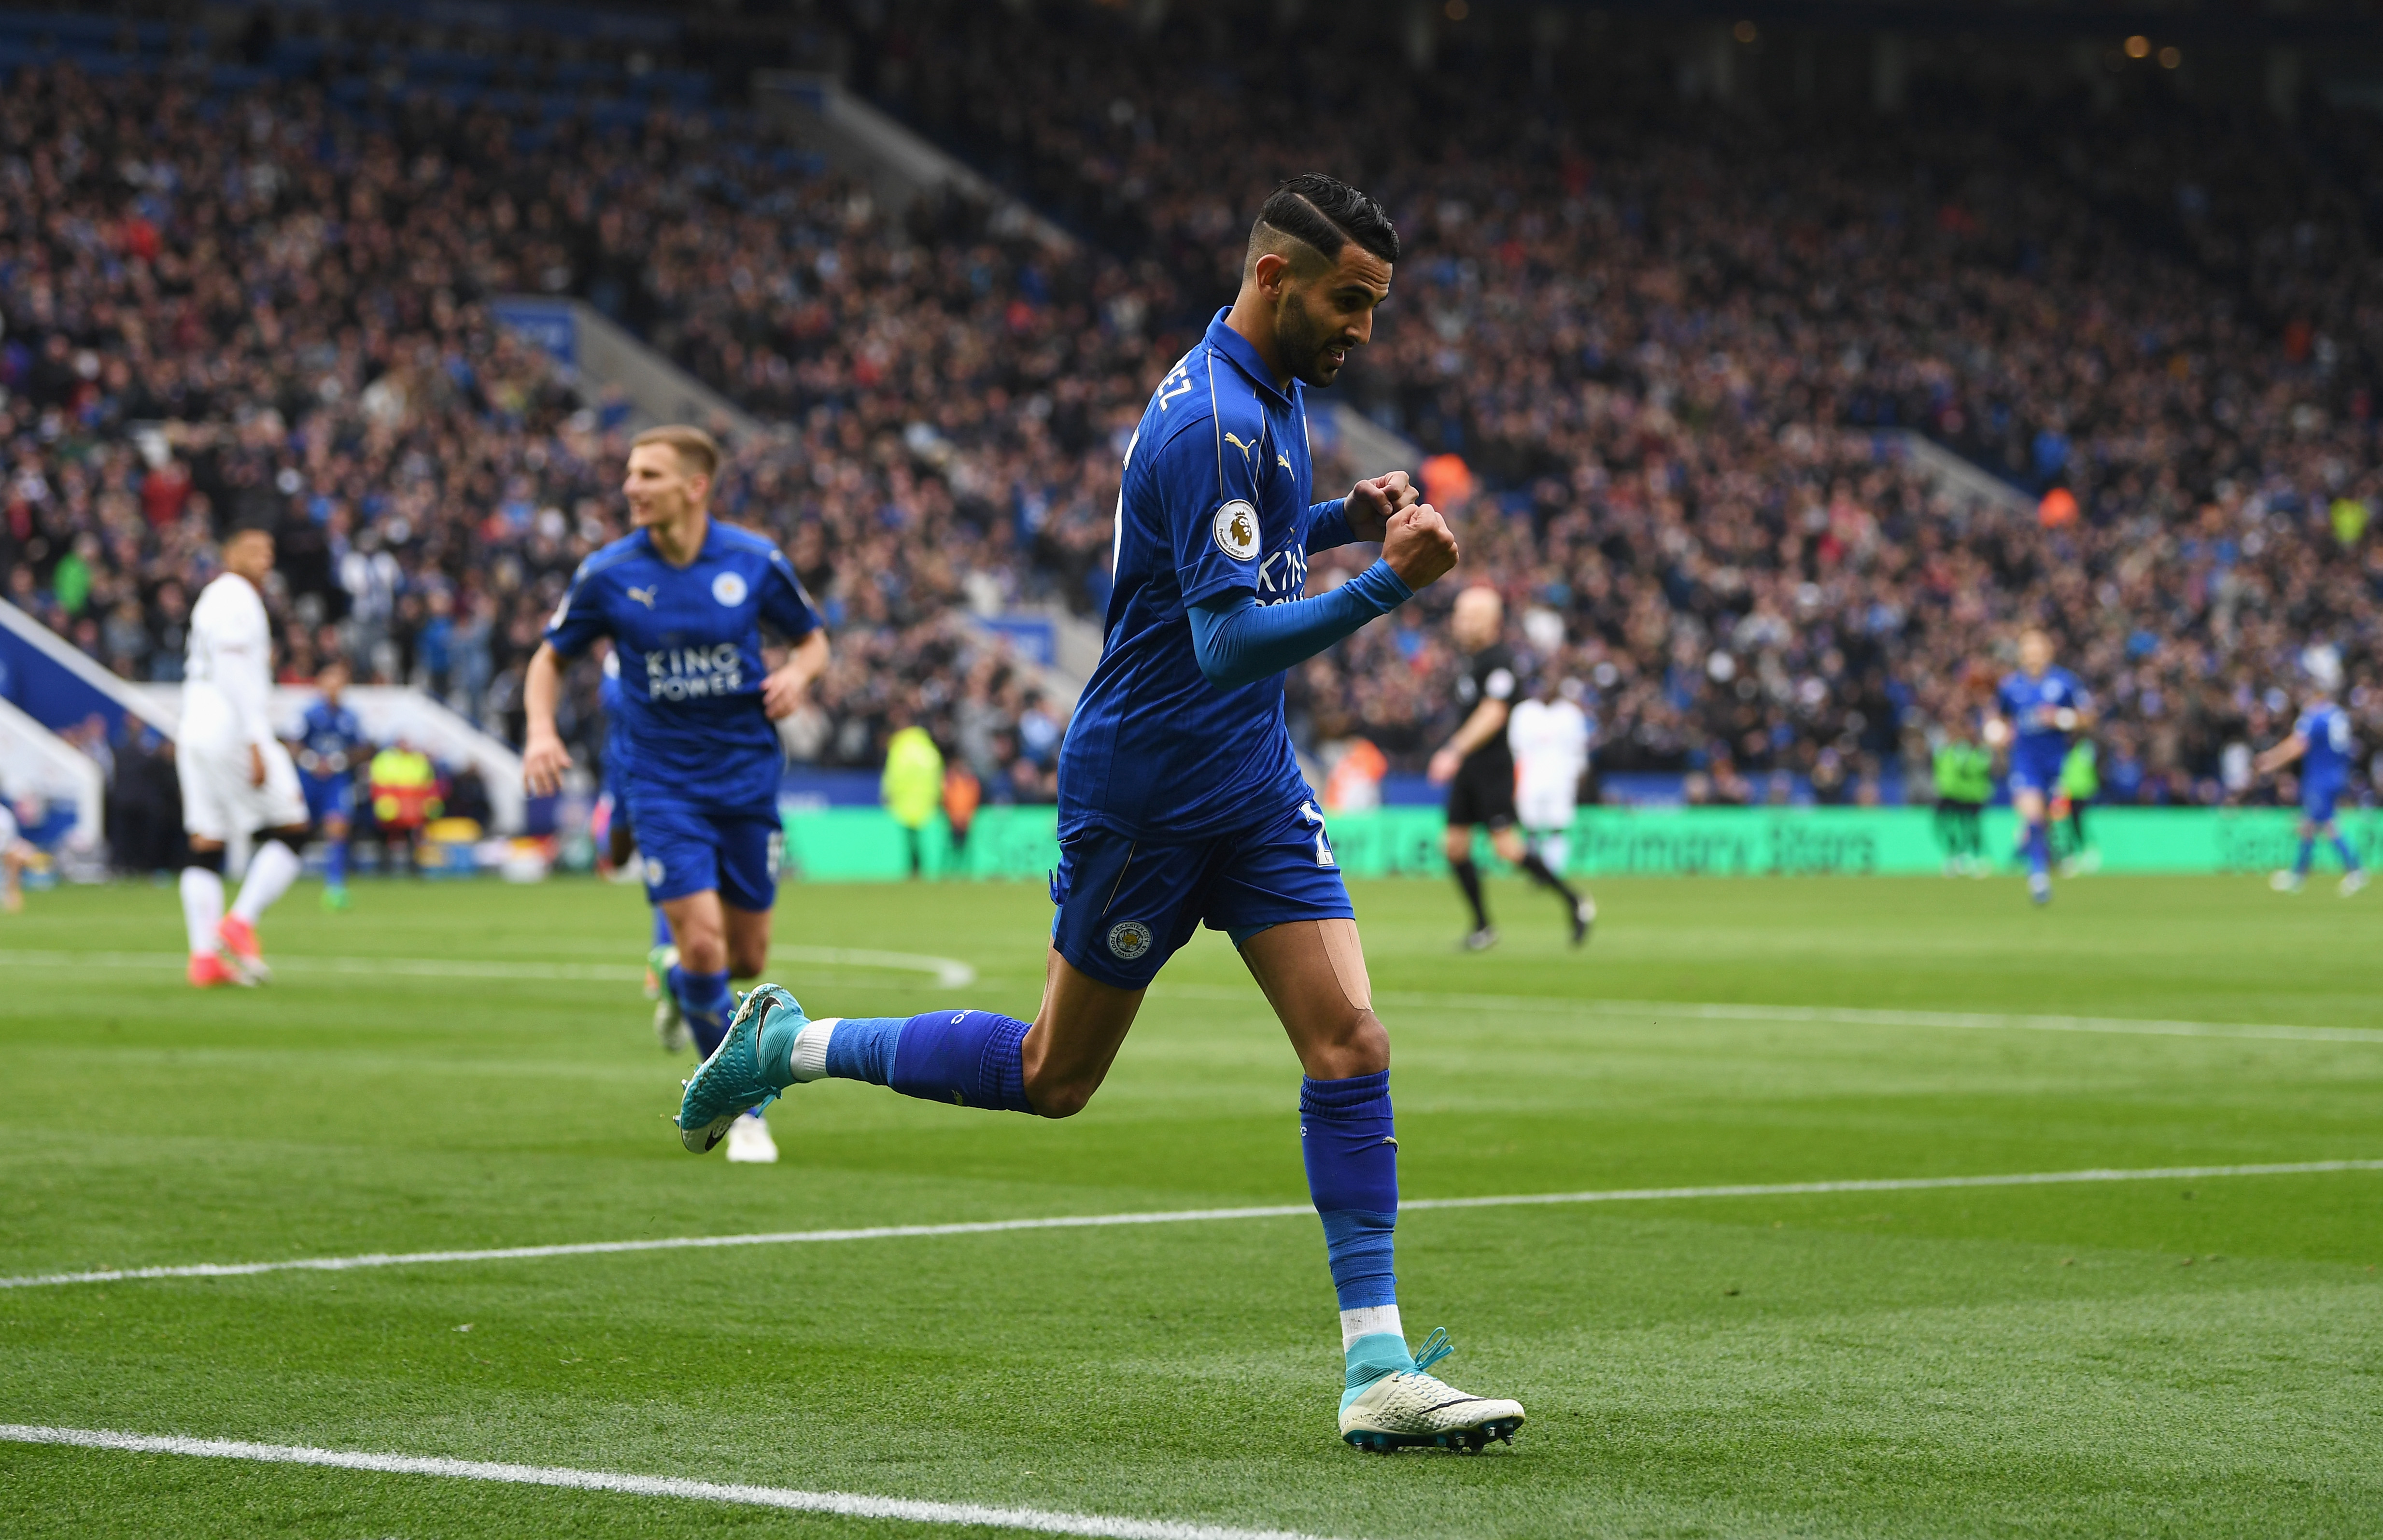 LEICESTER, ENGLAND - MAY 06:  Riyad Mahrez of Leicester City celebrates scoring his sides second goal during the Premier League match between Leicester City and Watford at The King Power Stadium on May 6, 2017 in Leicester, England.  (Photo by Michael Regan/Getty Images)